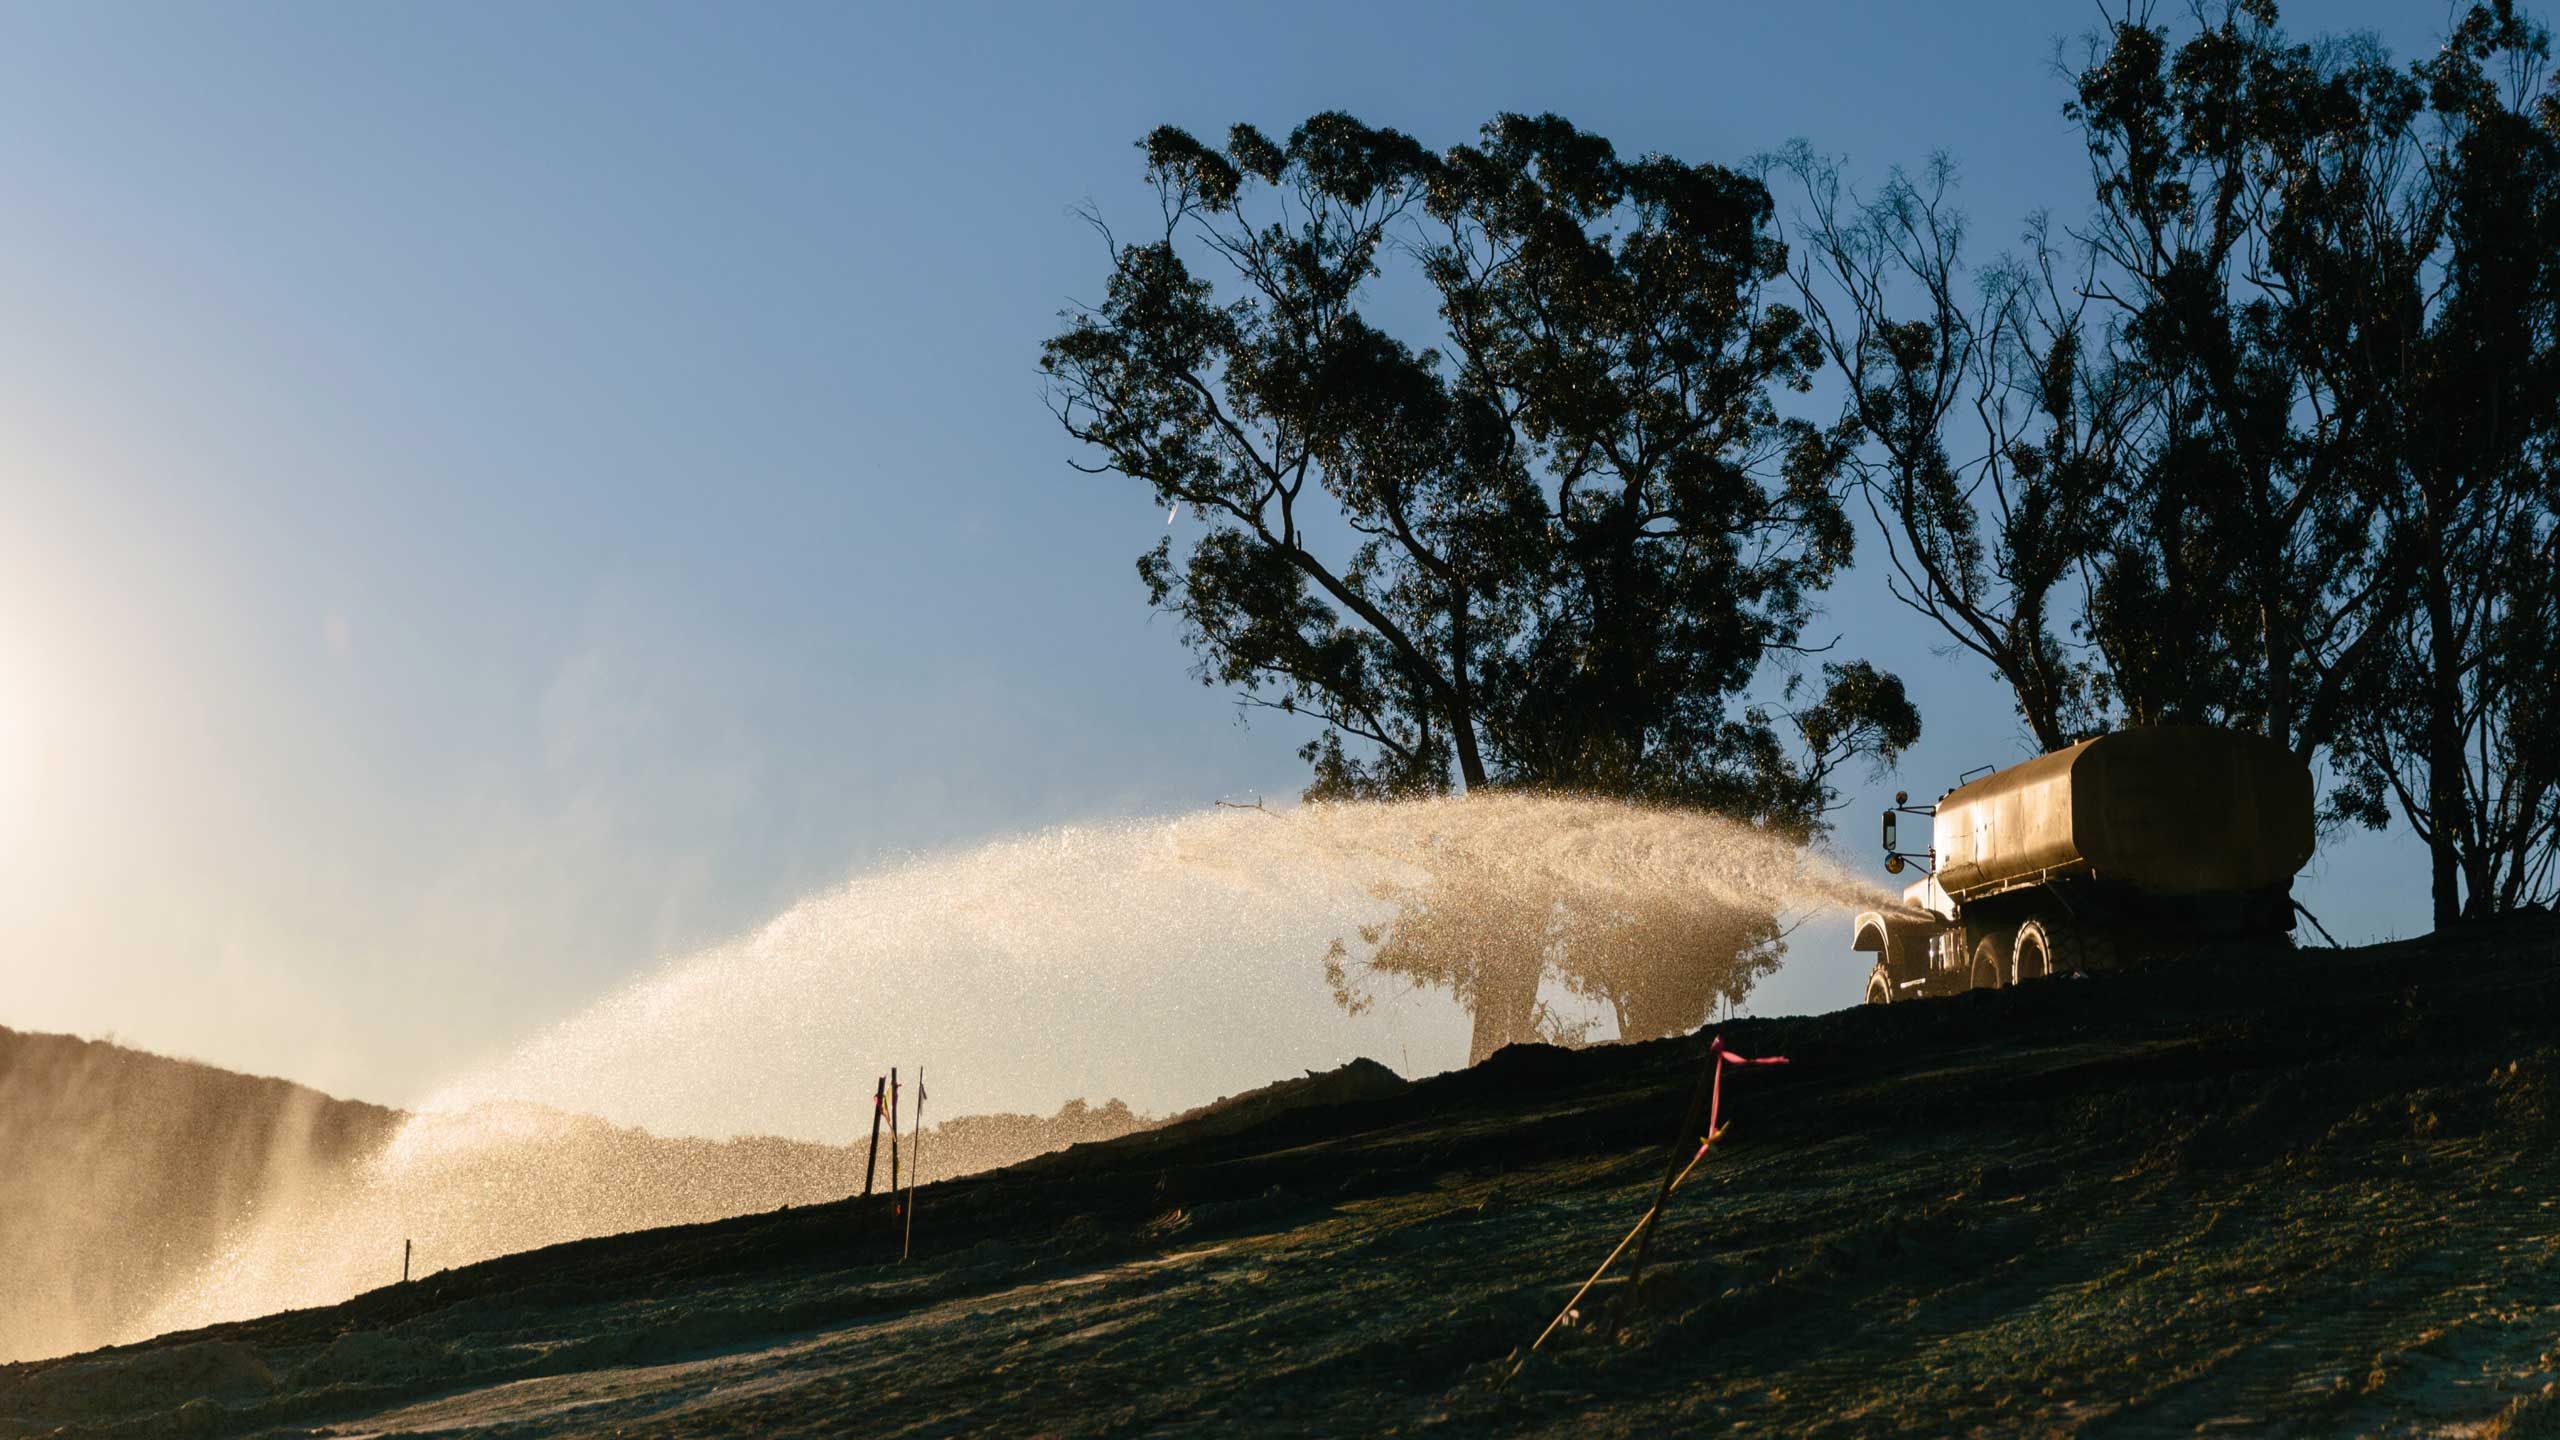 A truck spraying water on a field